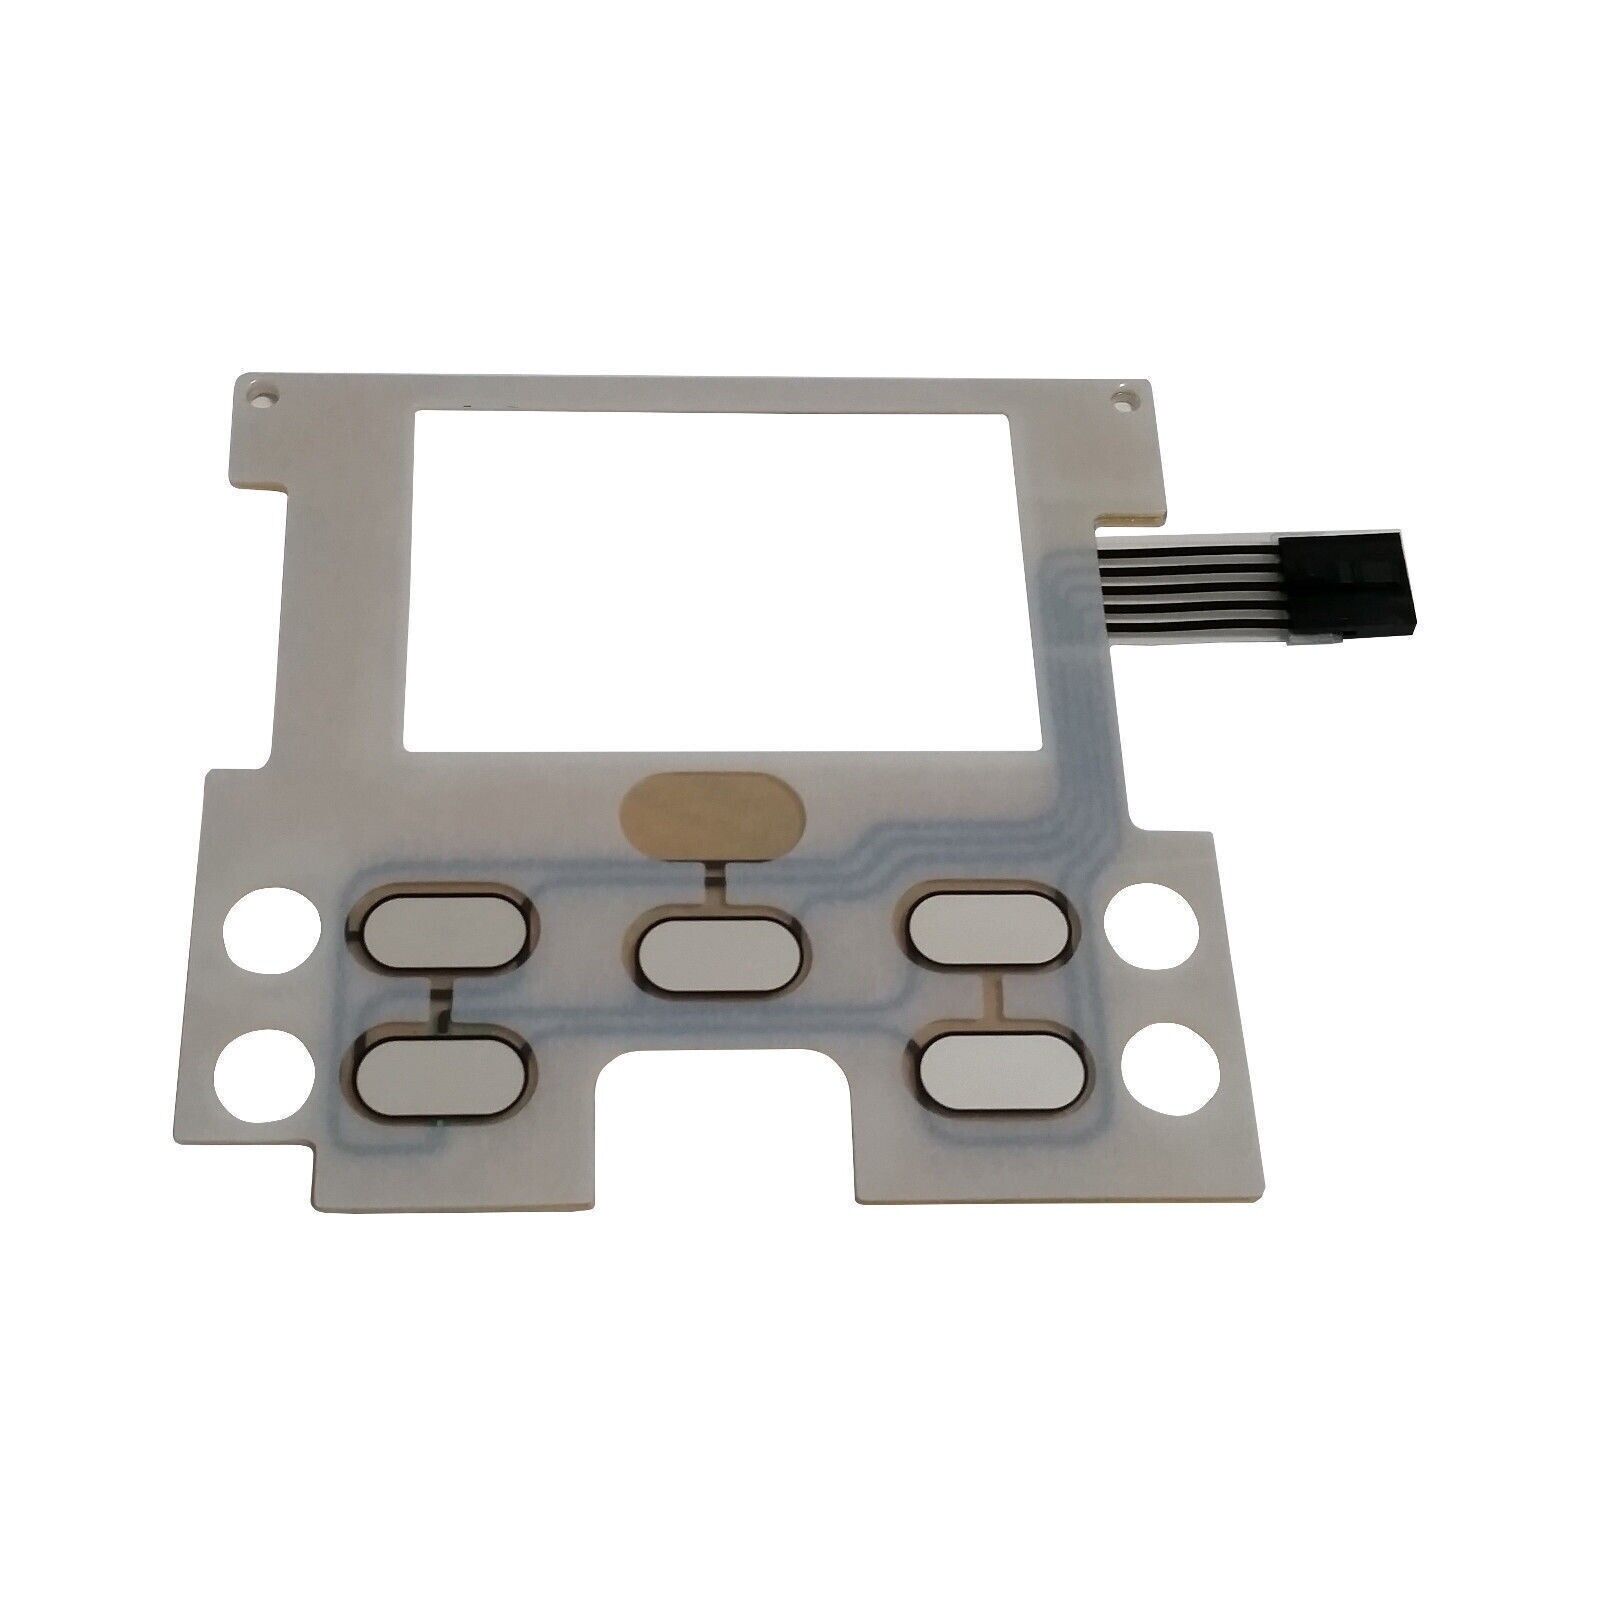 Membrane Switch Max 46% OFF Touchpad Compatible with SQ Discount is also underway Dryer 501456 Huebsch